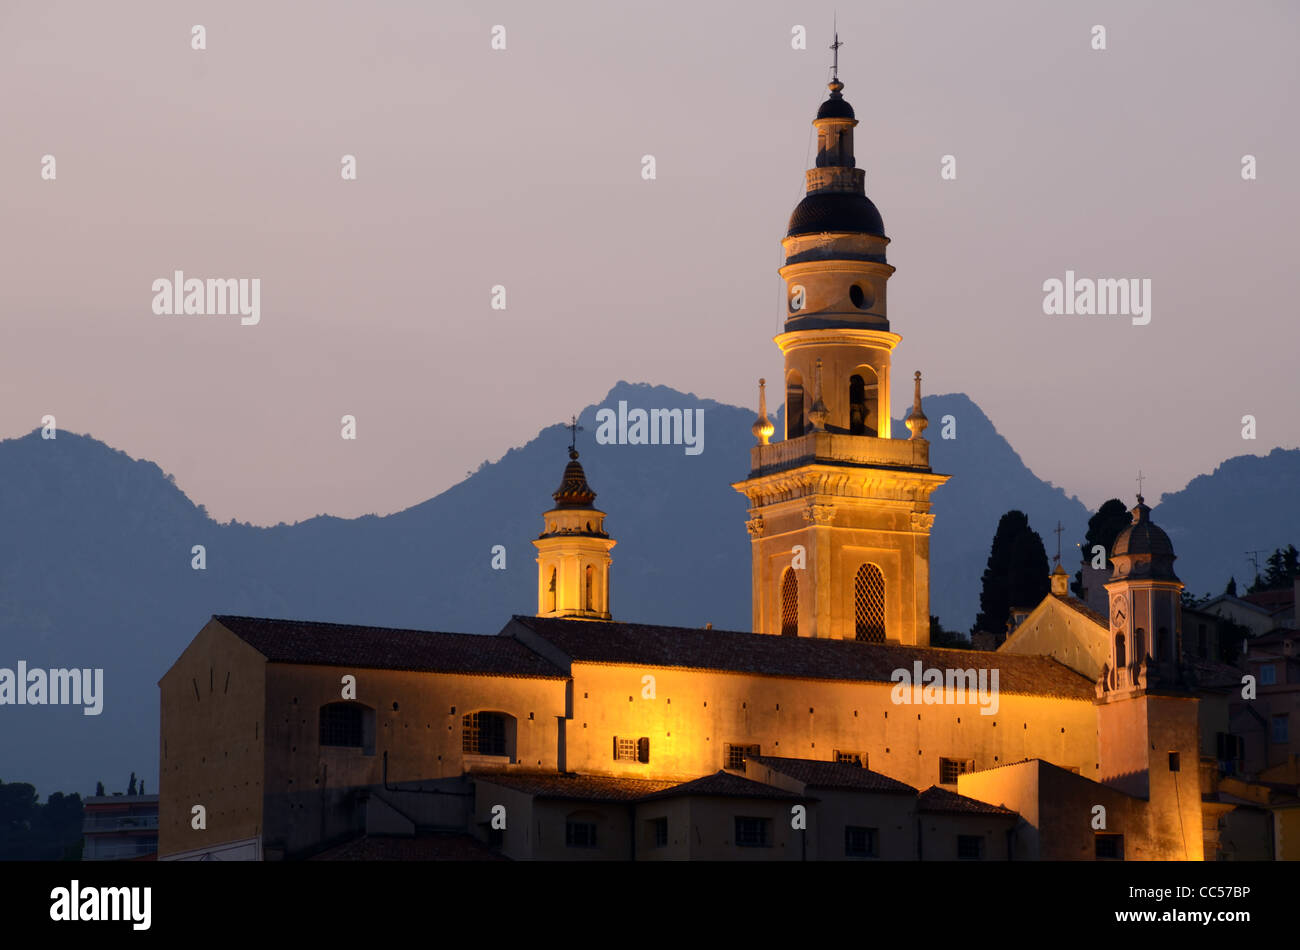 Menton Slyline at Dusk, Evening or Night View of Saint Michel Cathedral or Basilica (built 1653) in the Old Town or Historic District Menton France Stock Photo